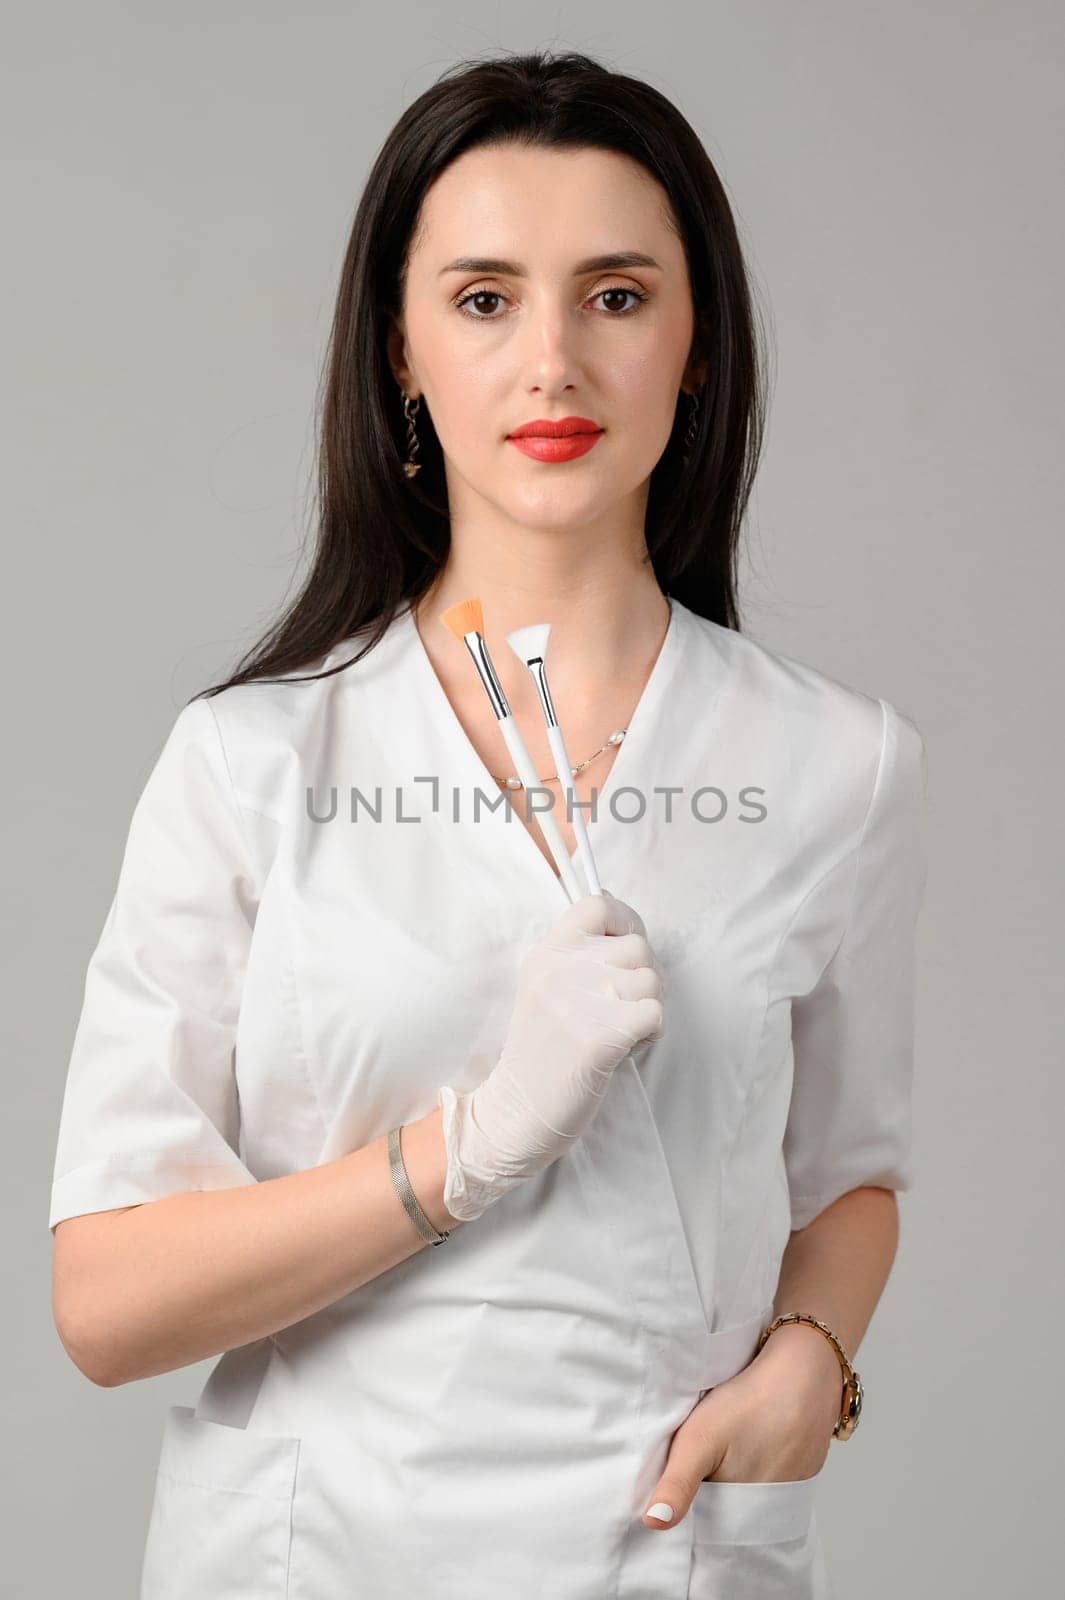 the girl cosmetologist holds two brushes in her hands on a white background, the girl is a beautician in white disposable gloves.